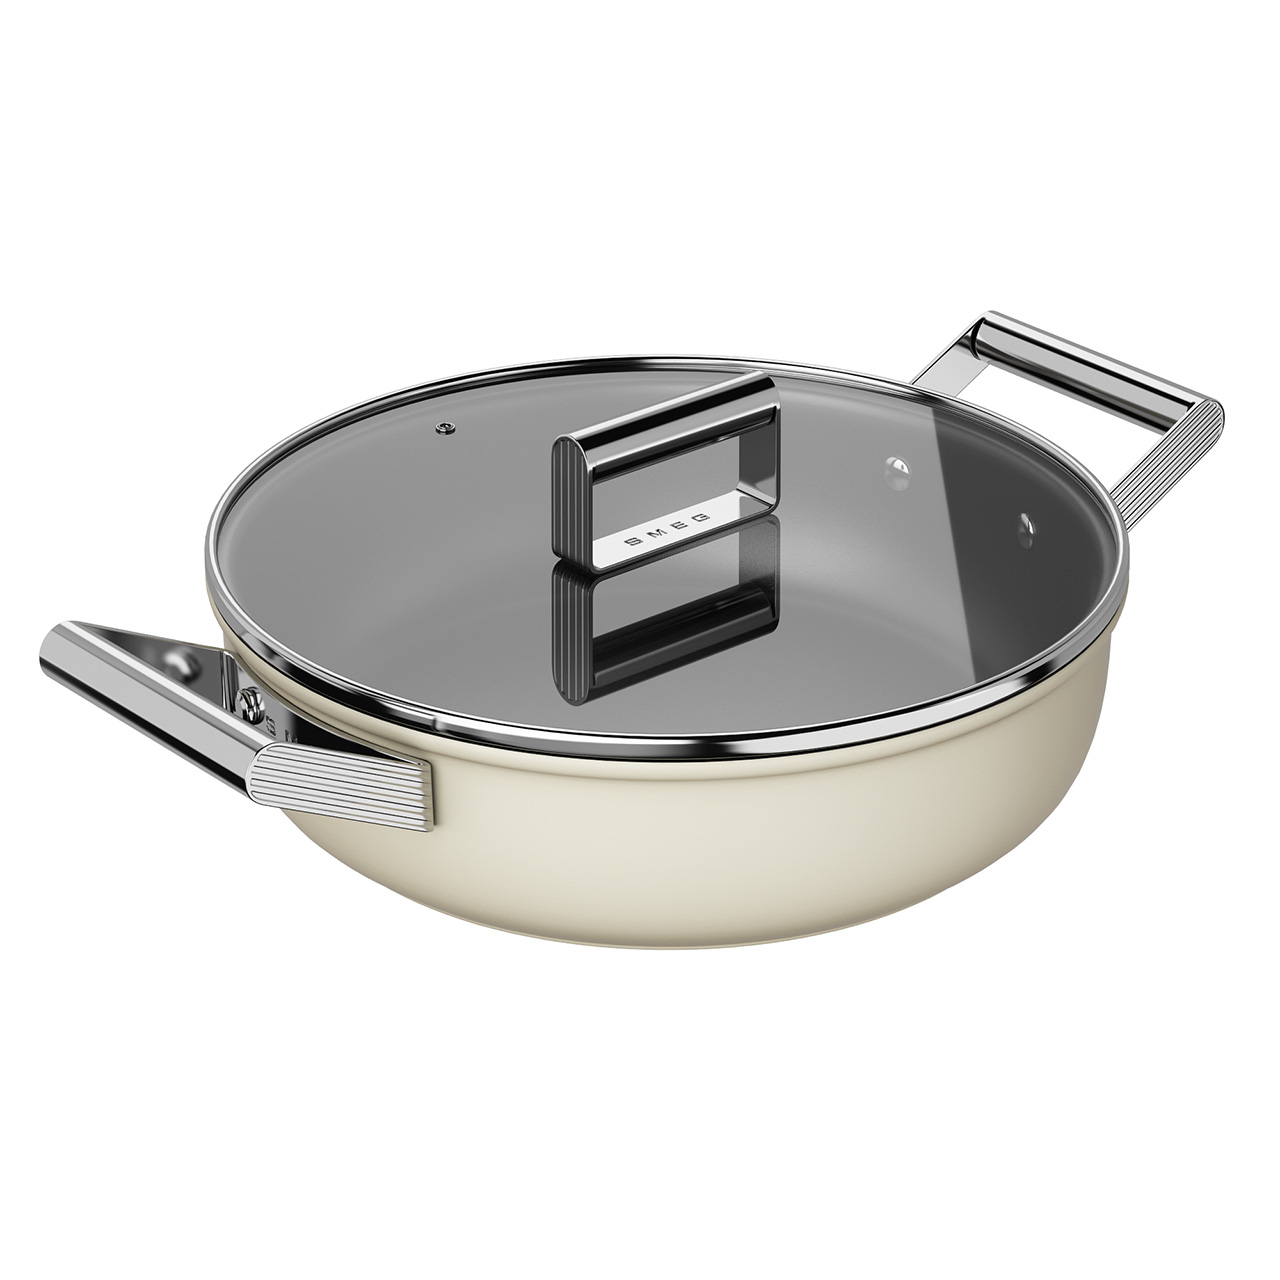 Cookware Deep Pan 50’s Style by Smeg